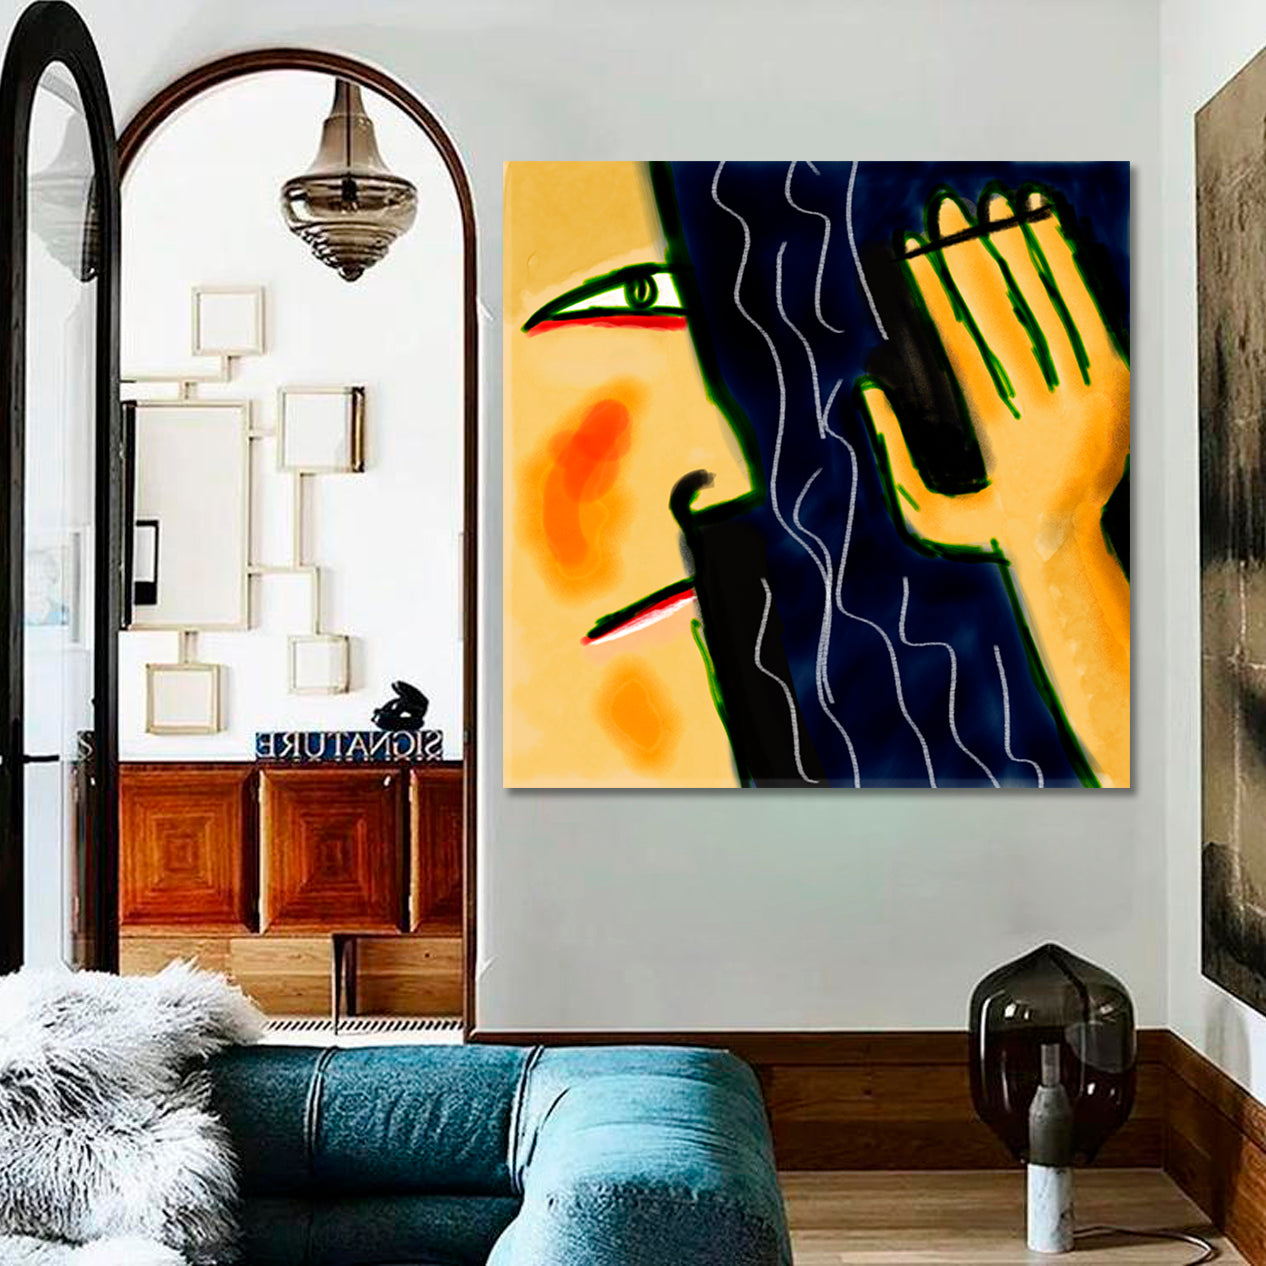 ABSTRACT EXPRESSIONISM Surreal Faces Modern Art Contemporary Art Artesty   